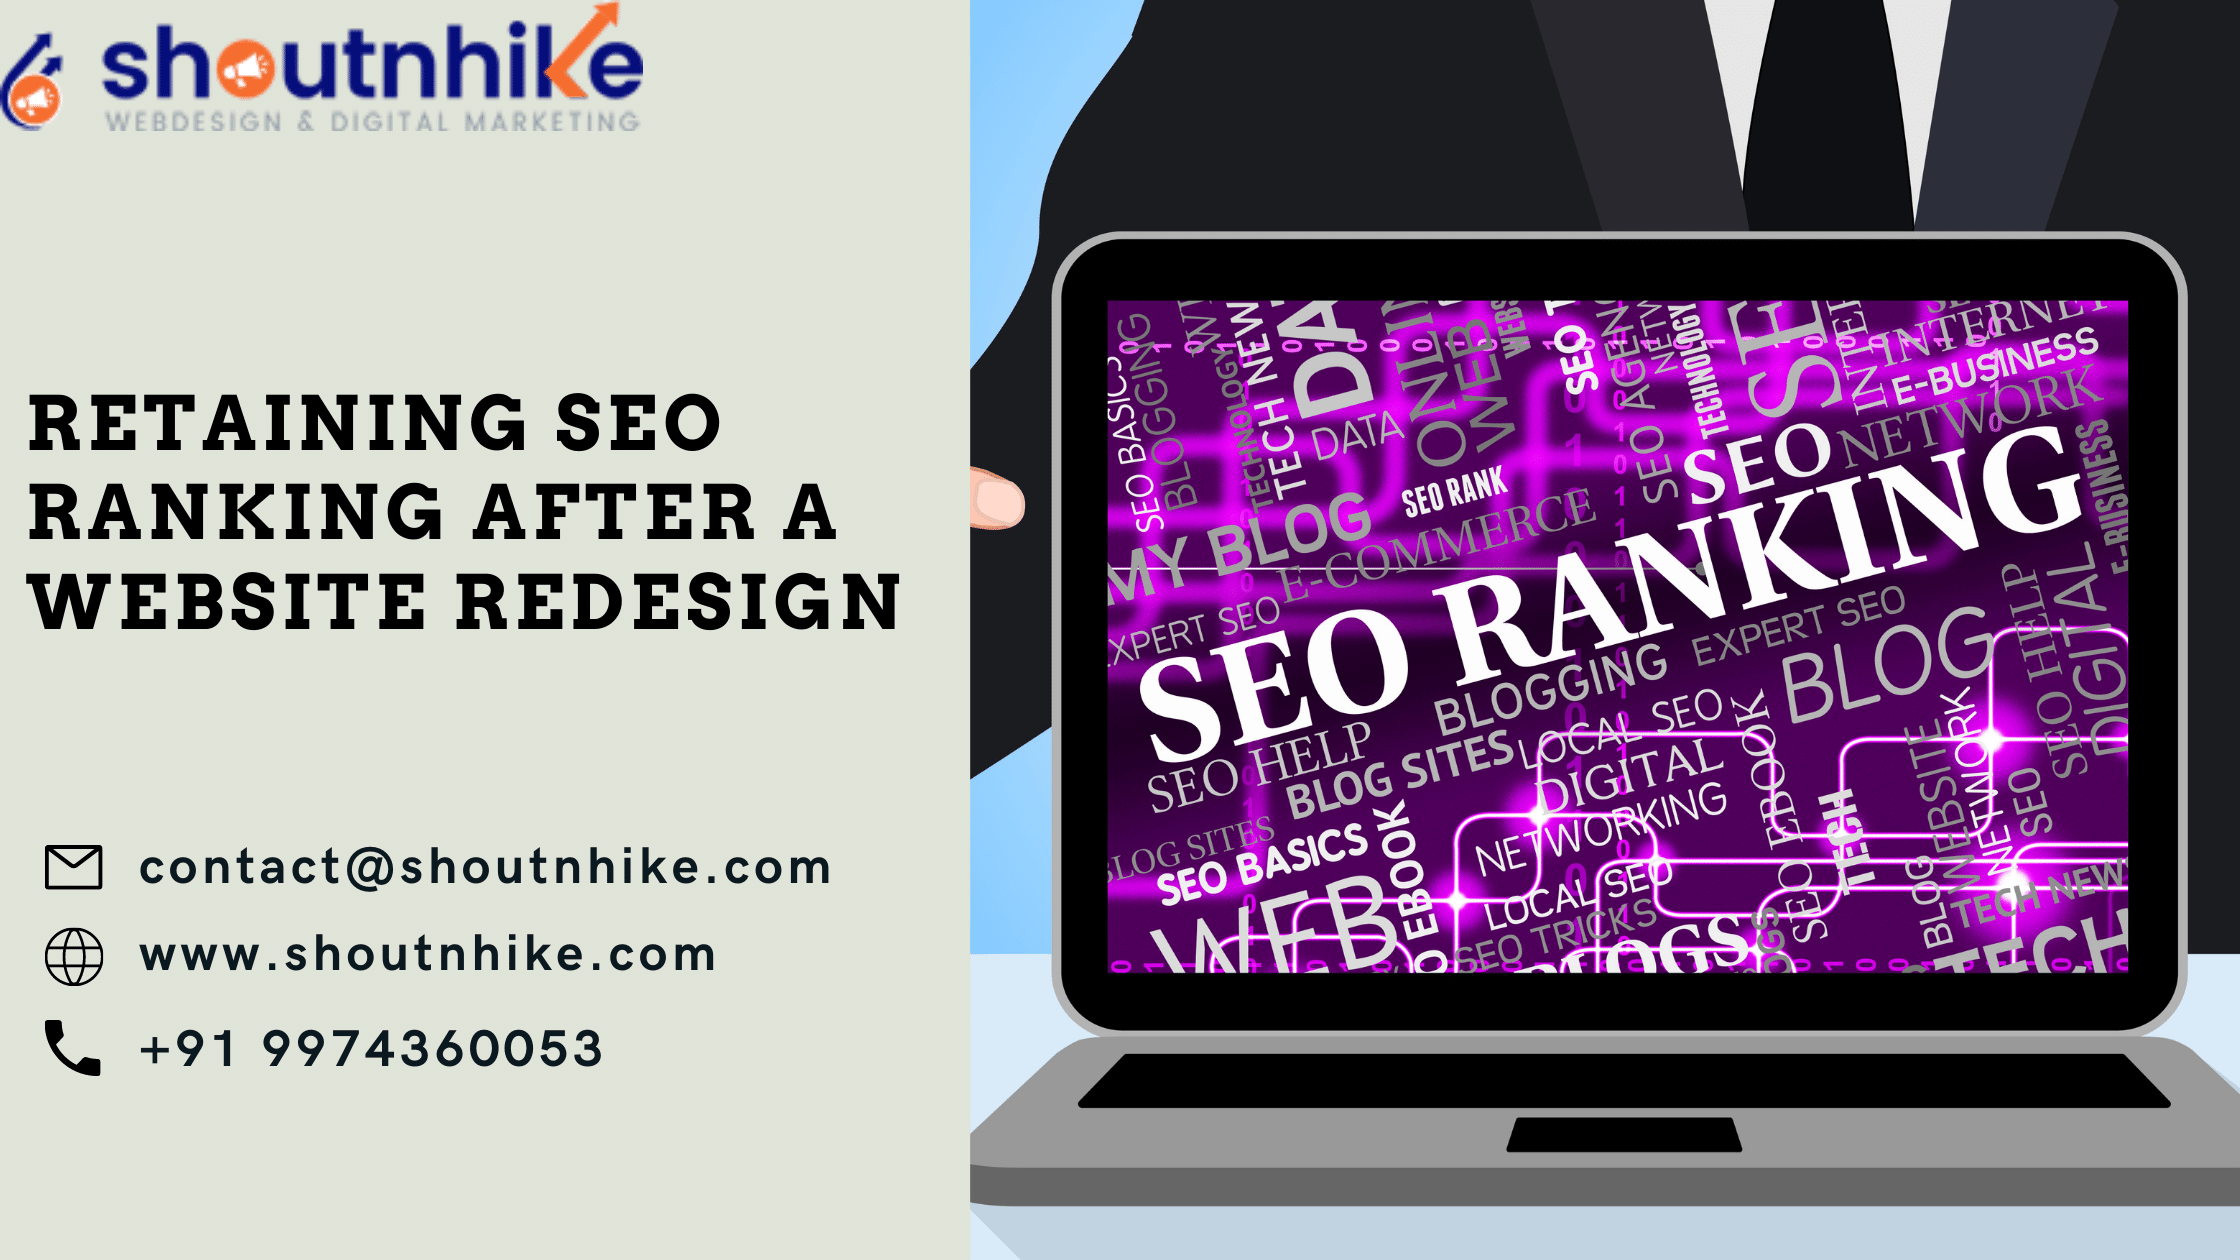 Retaining SEO Ranking After a Website Redesign